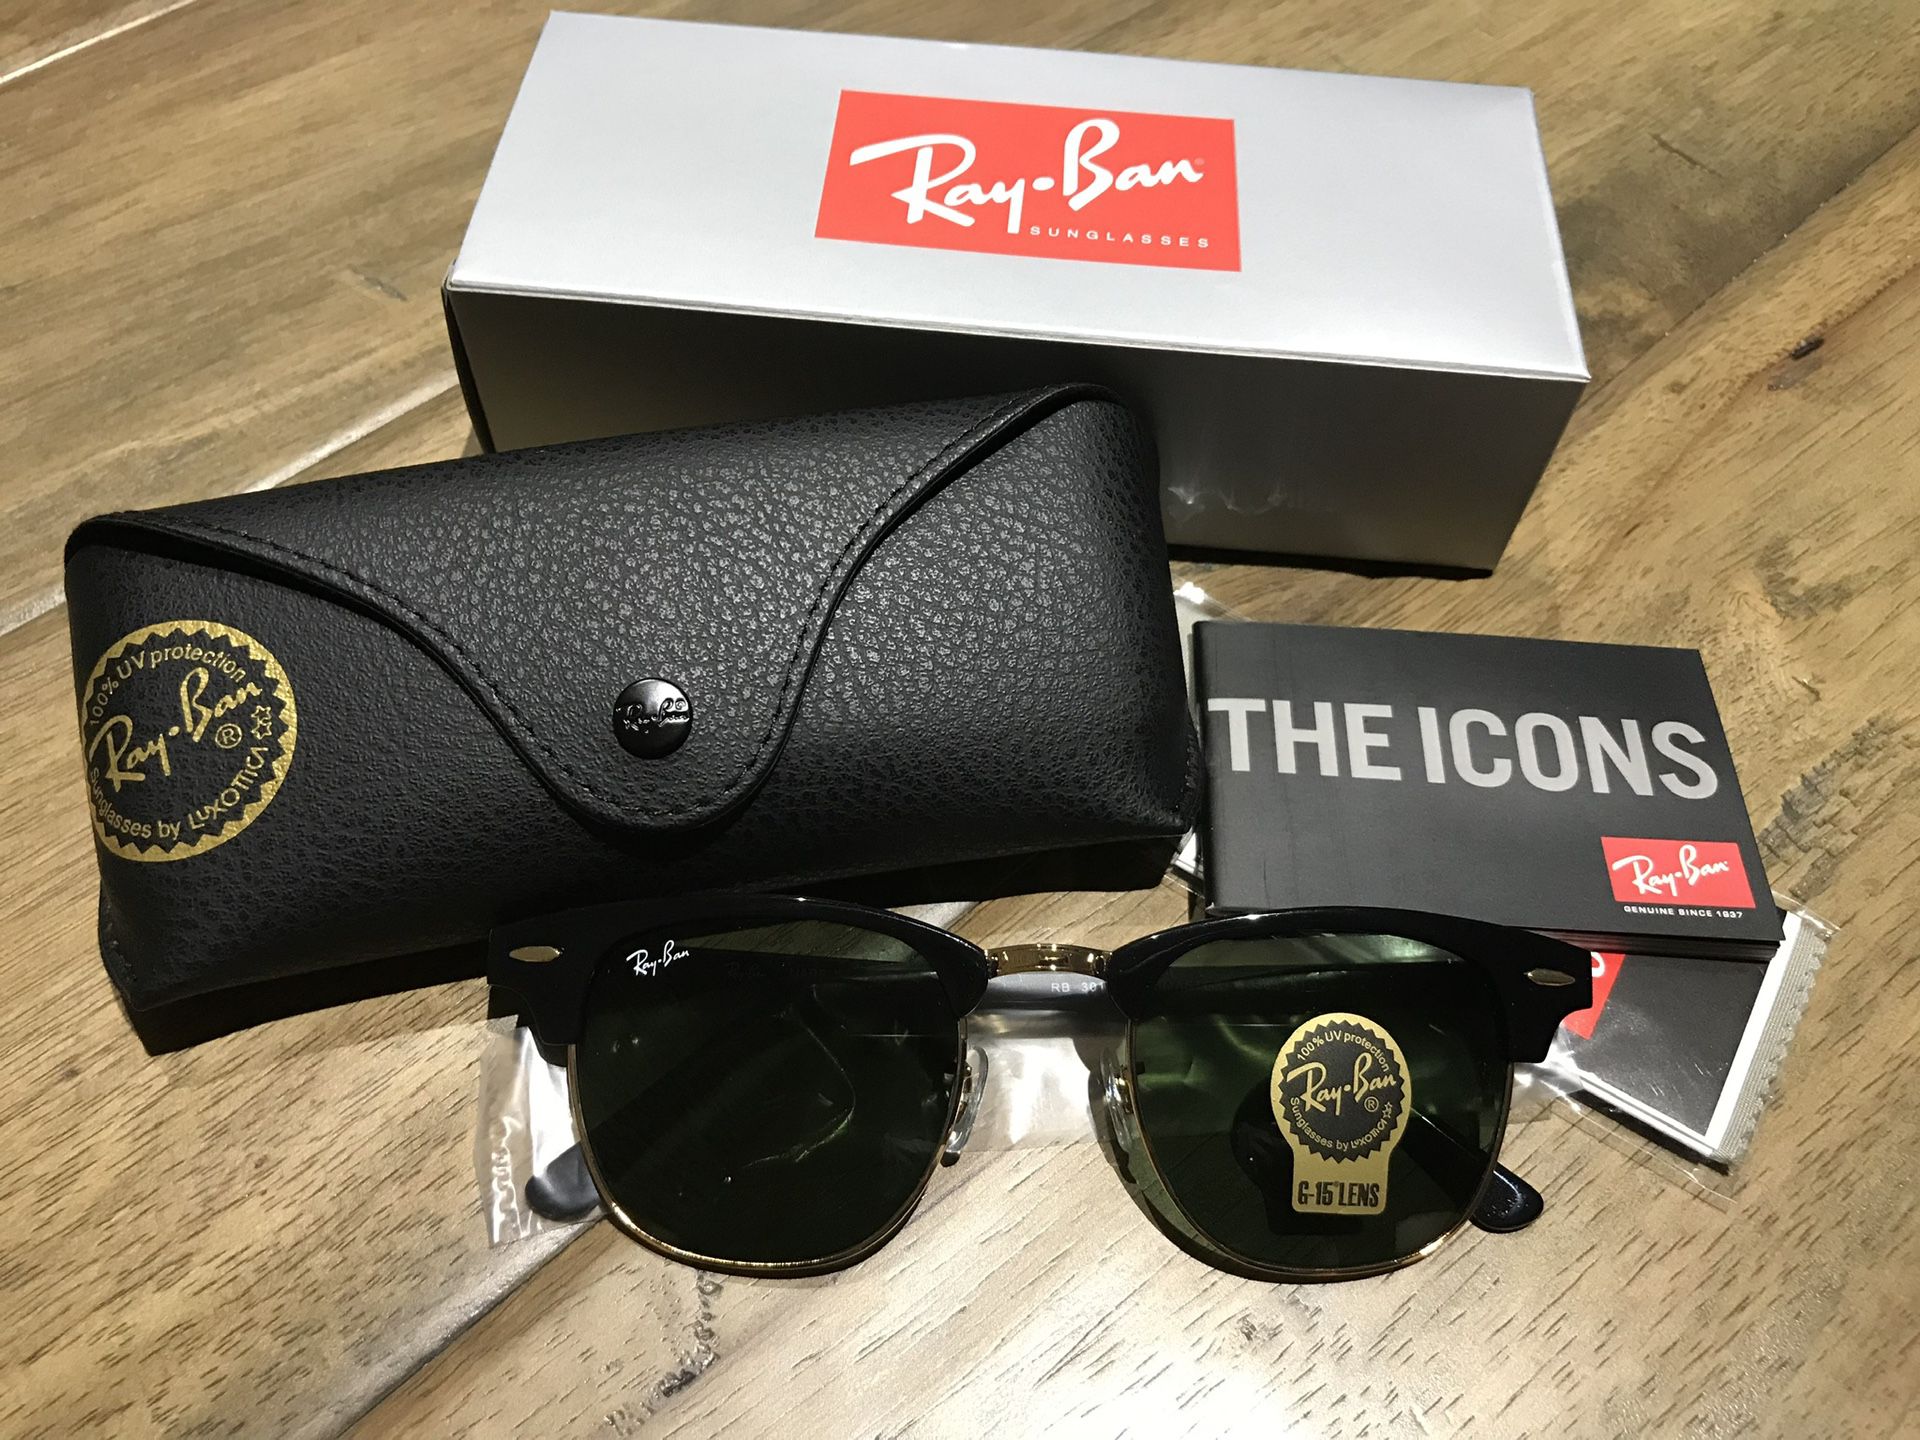 Ray Ban Clubmaster classic black and gold frame sunglasses